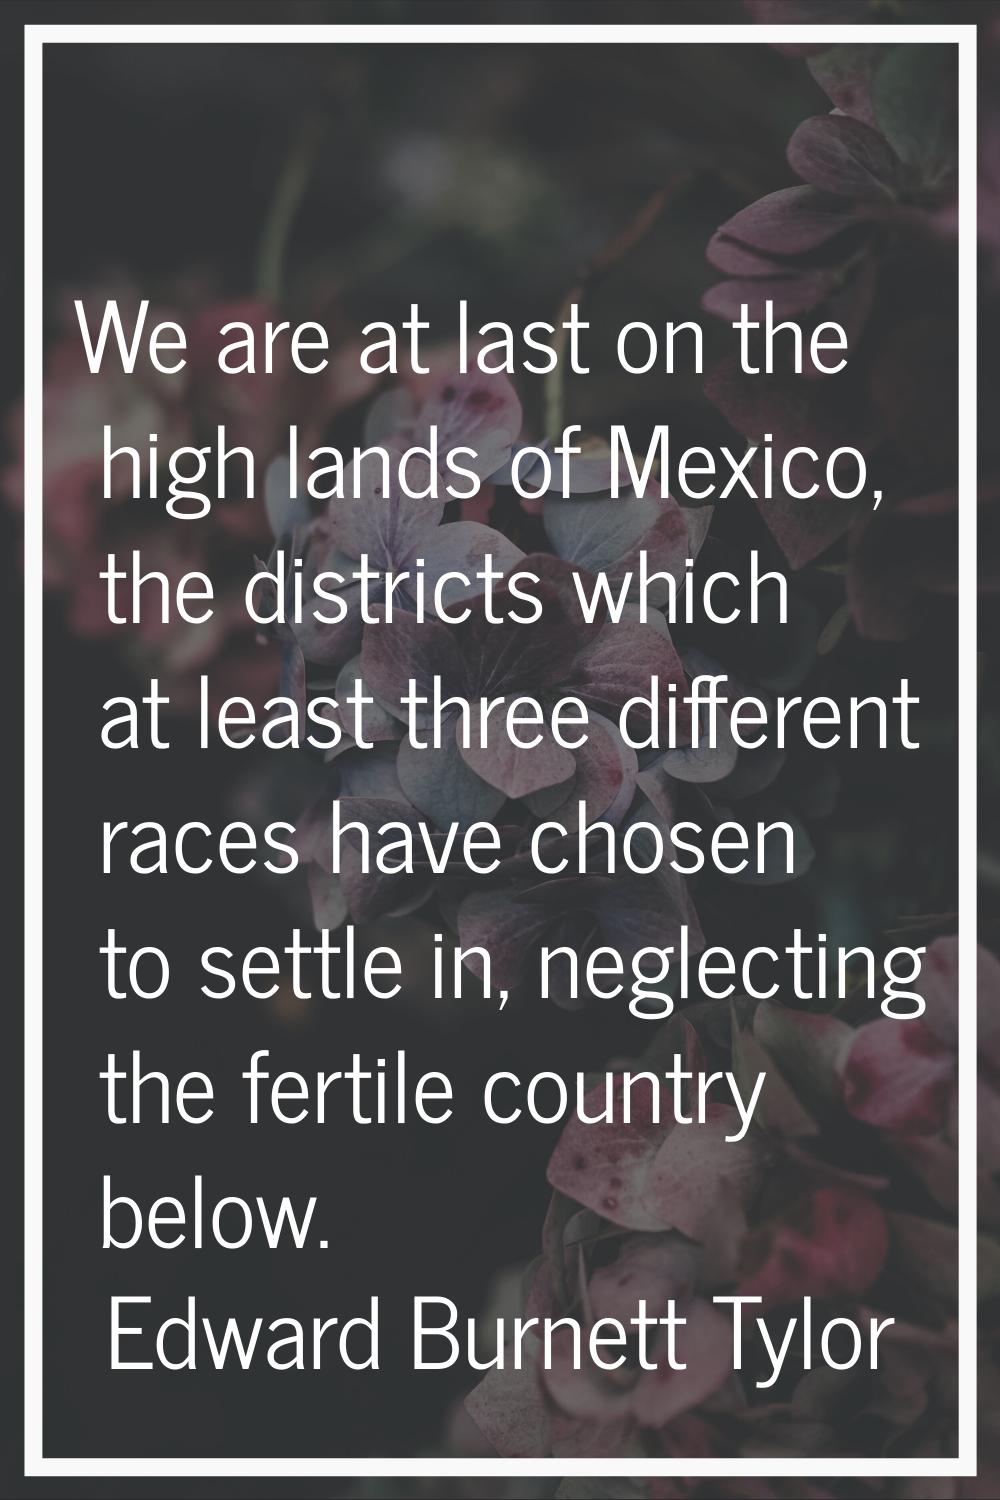 We are at last on the high lands of Mexico, the districts which at least three different races have